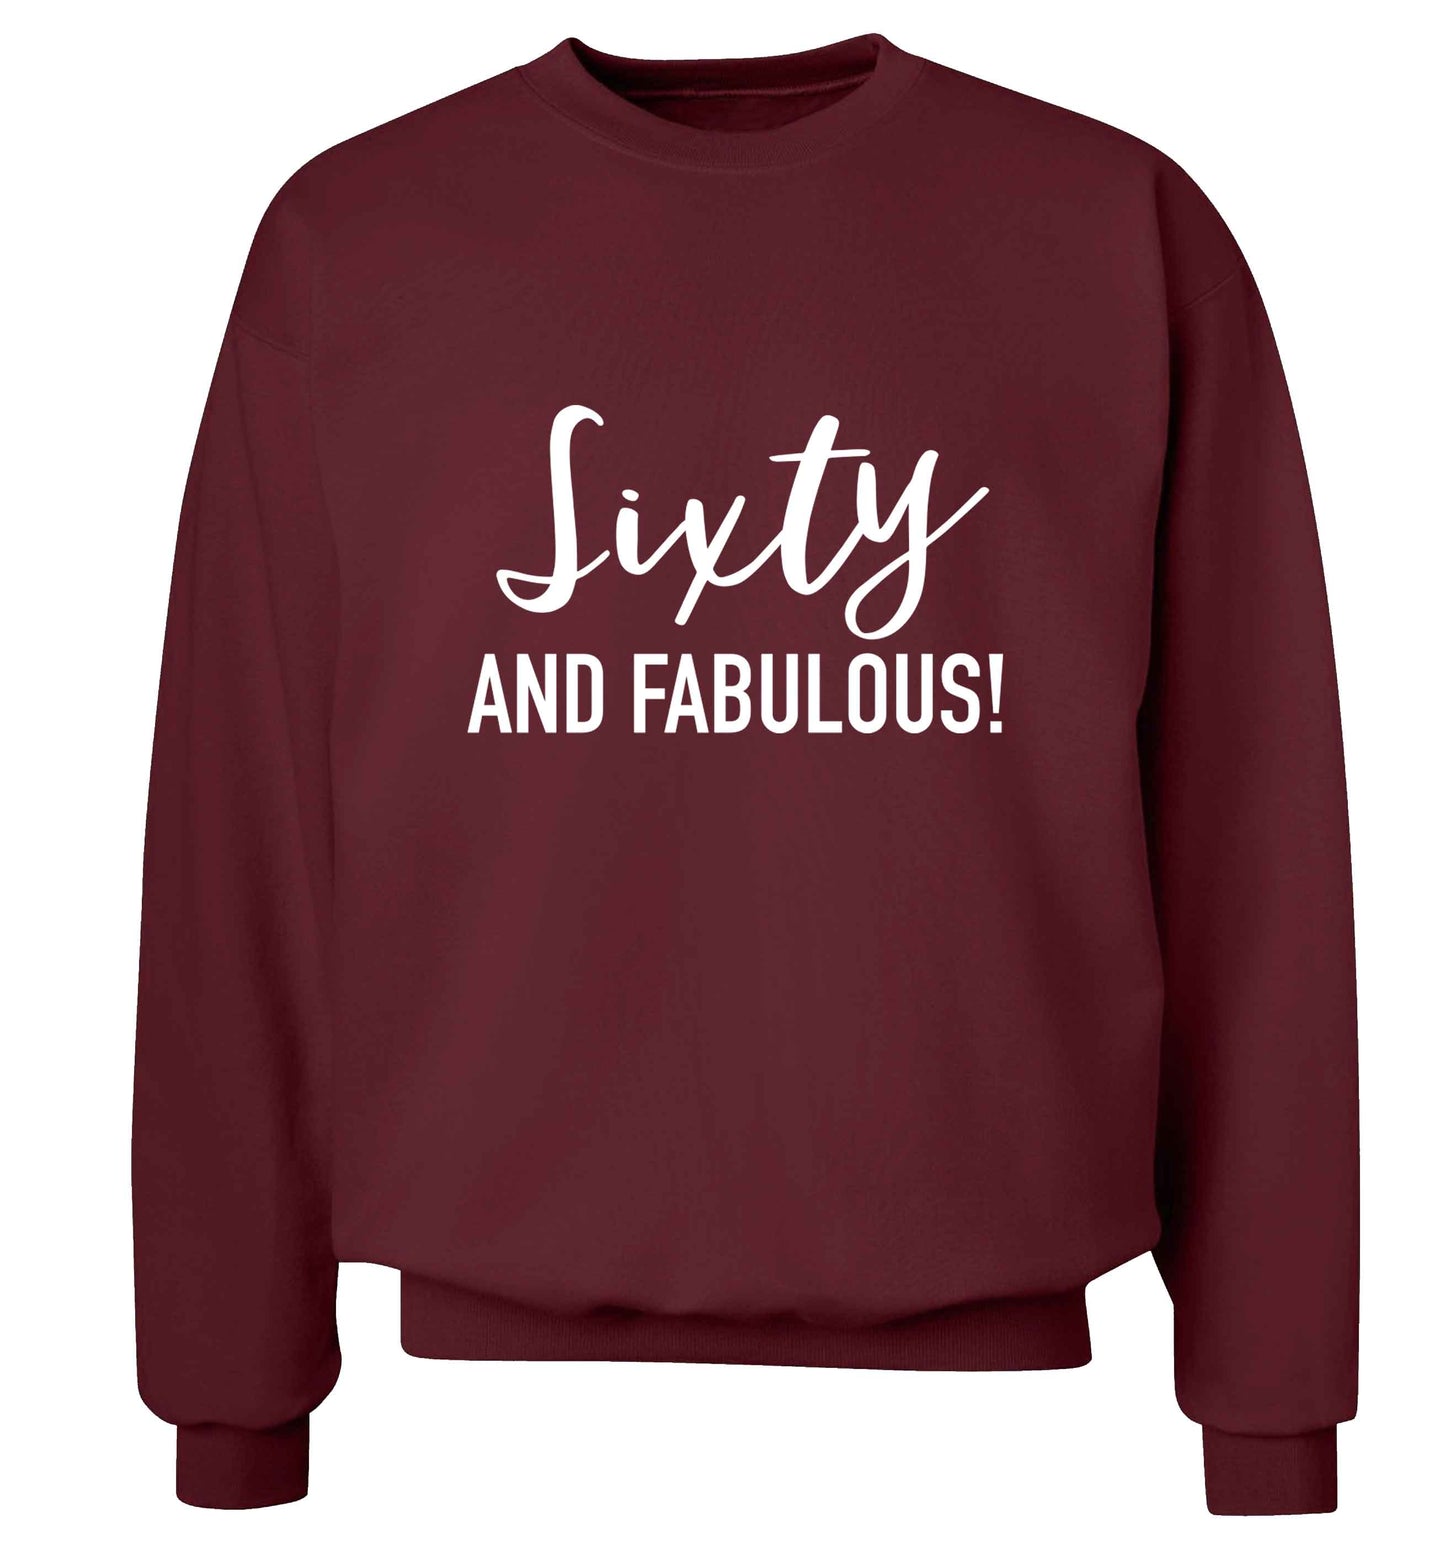 Sixty and fabulous adult's unisex maroon sweater 2XL